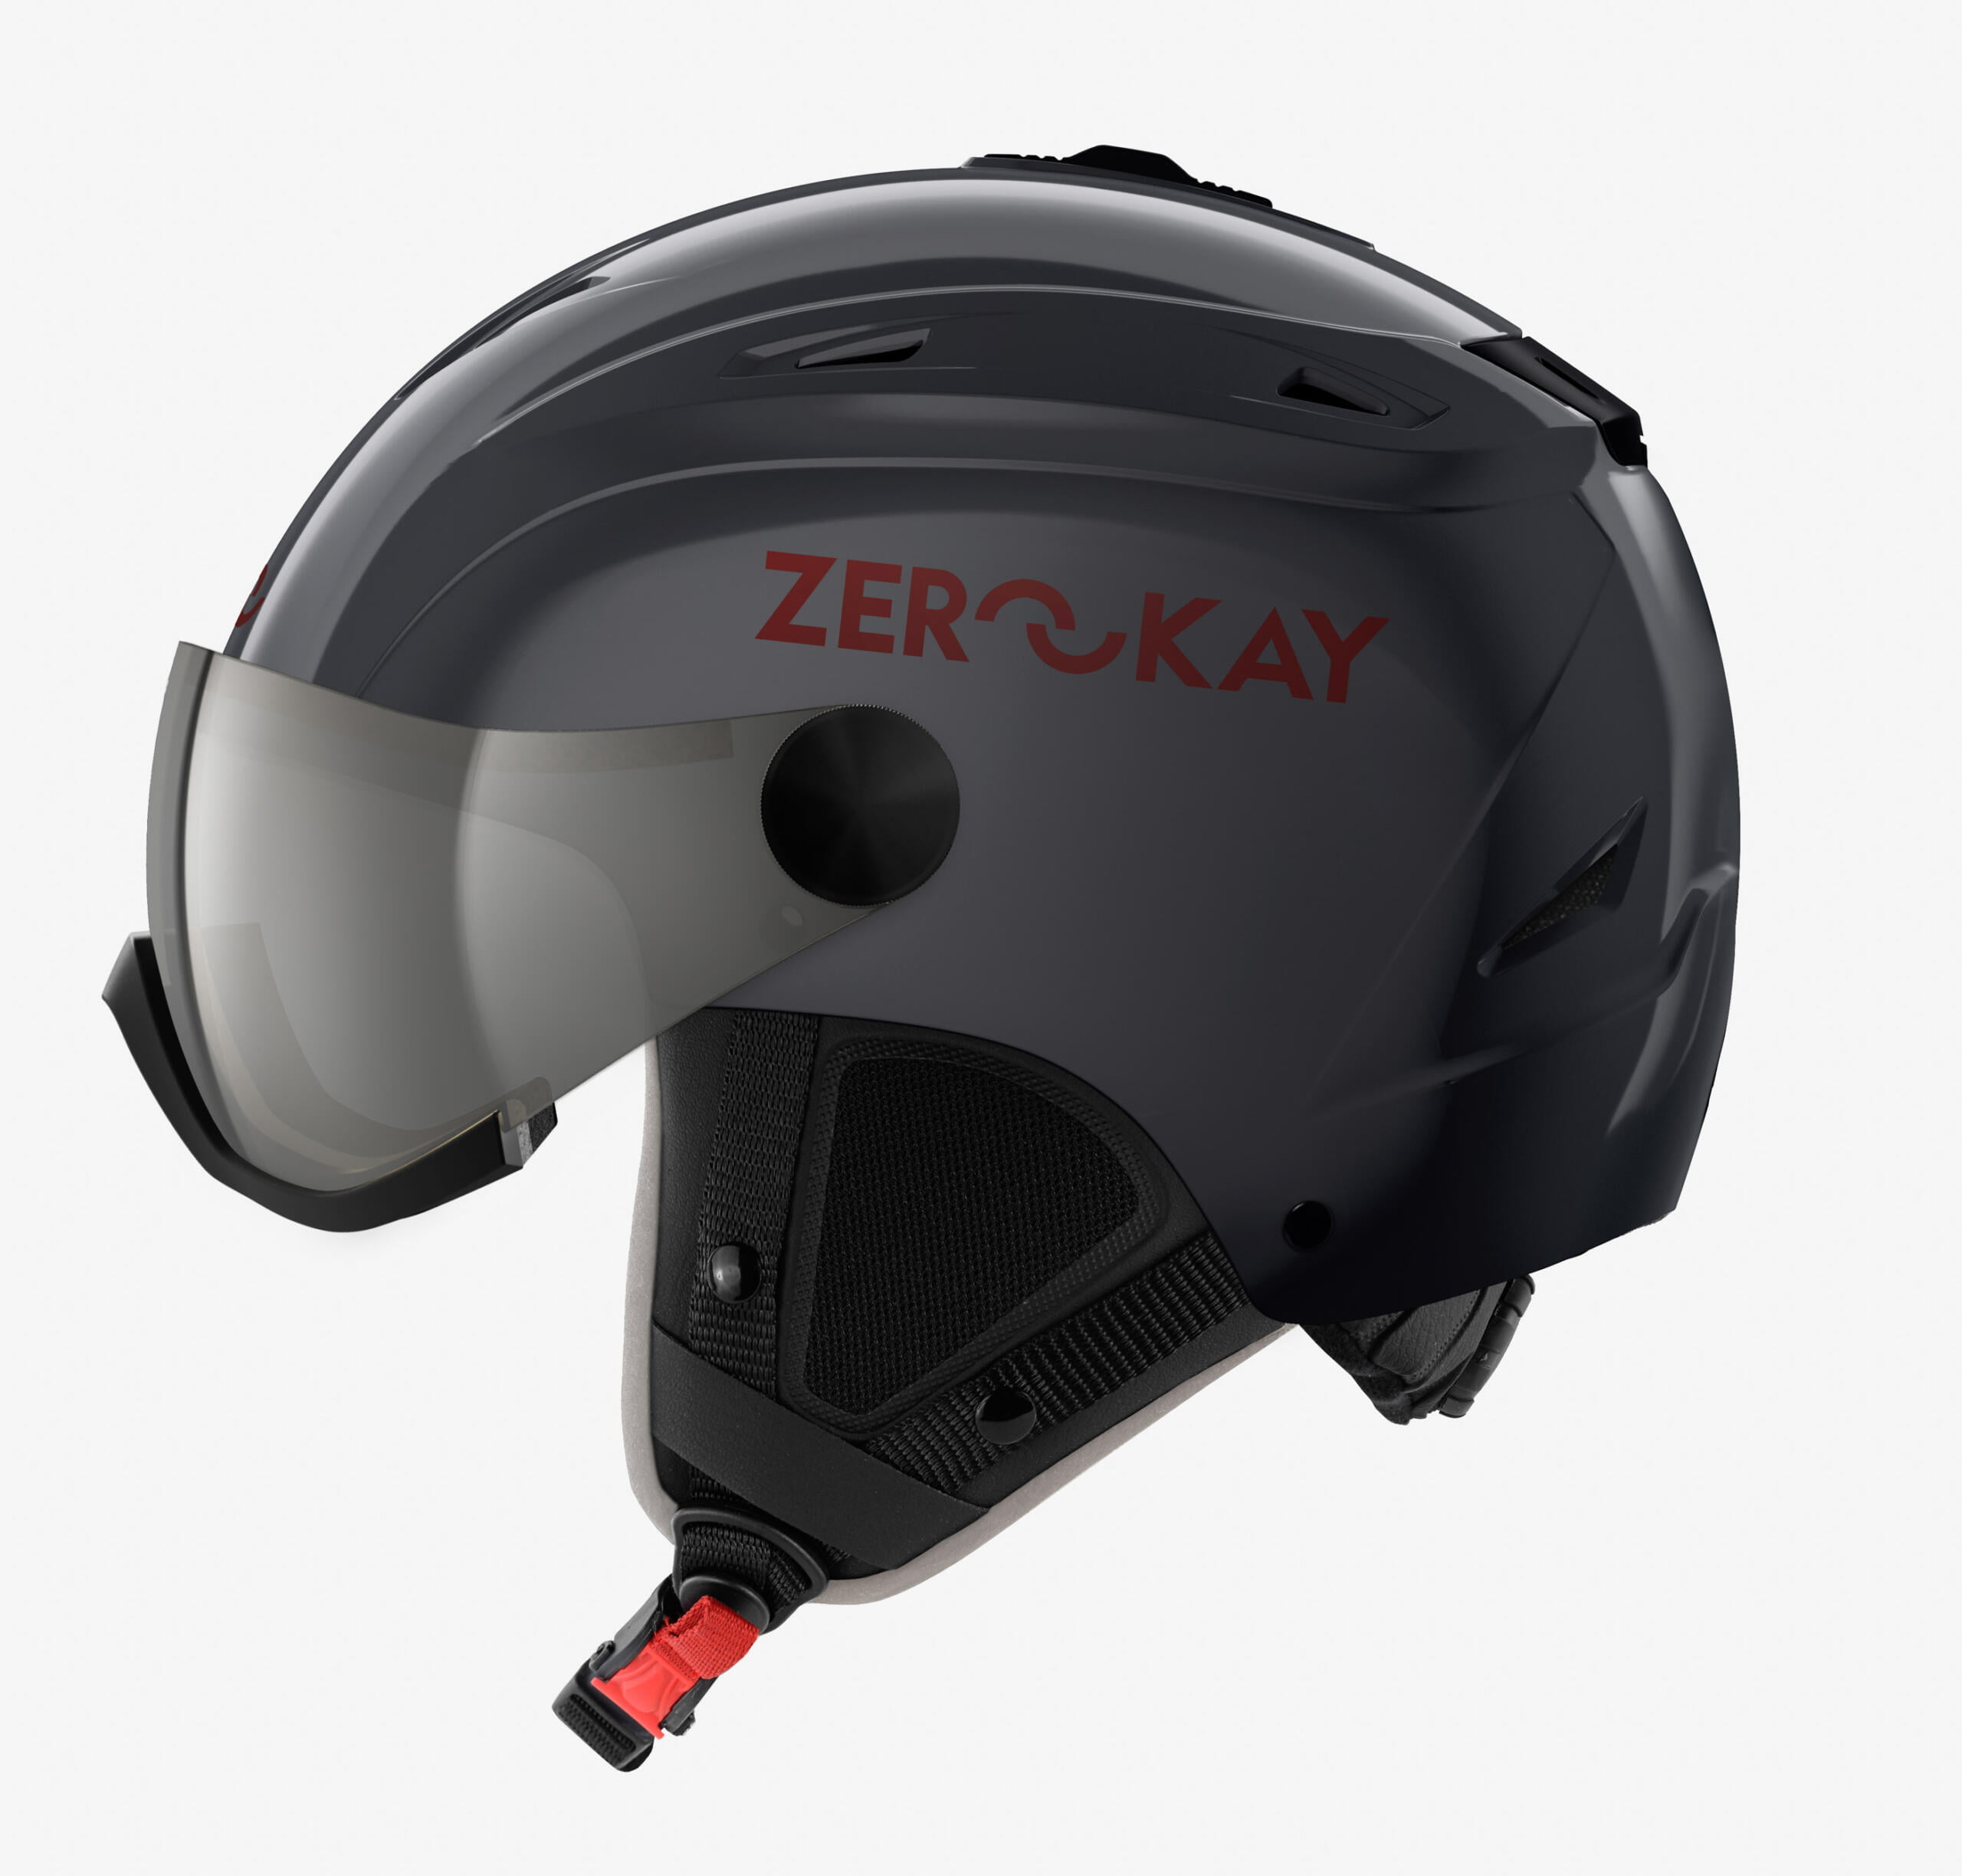 Zerokay Visor:  ski helmet with integrated visor  in grey with sanitised lining, featuring a gloss finish and offering superior comfort and certified safety features.